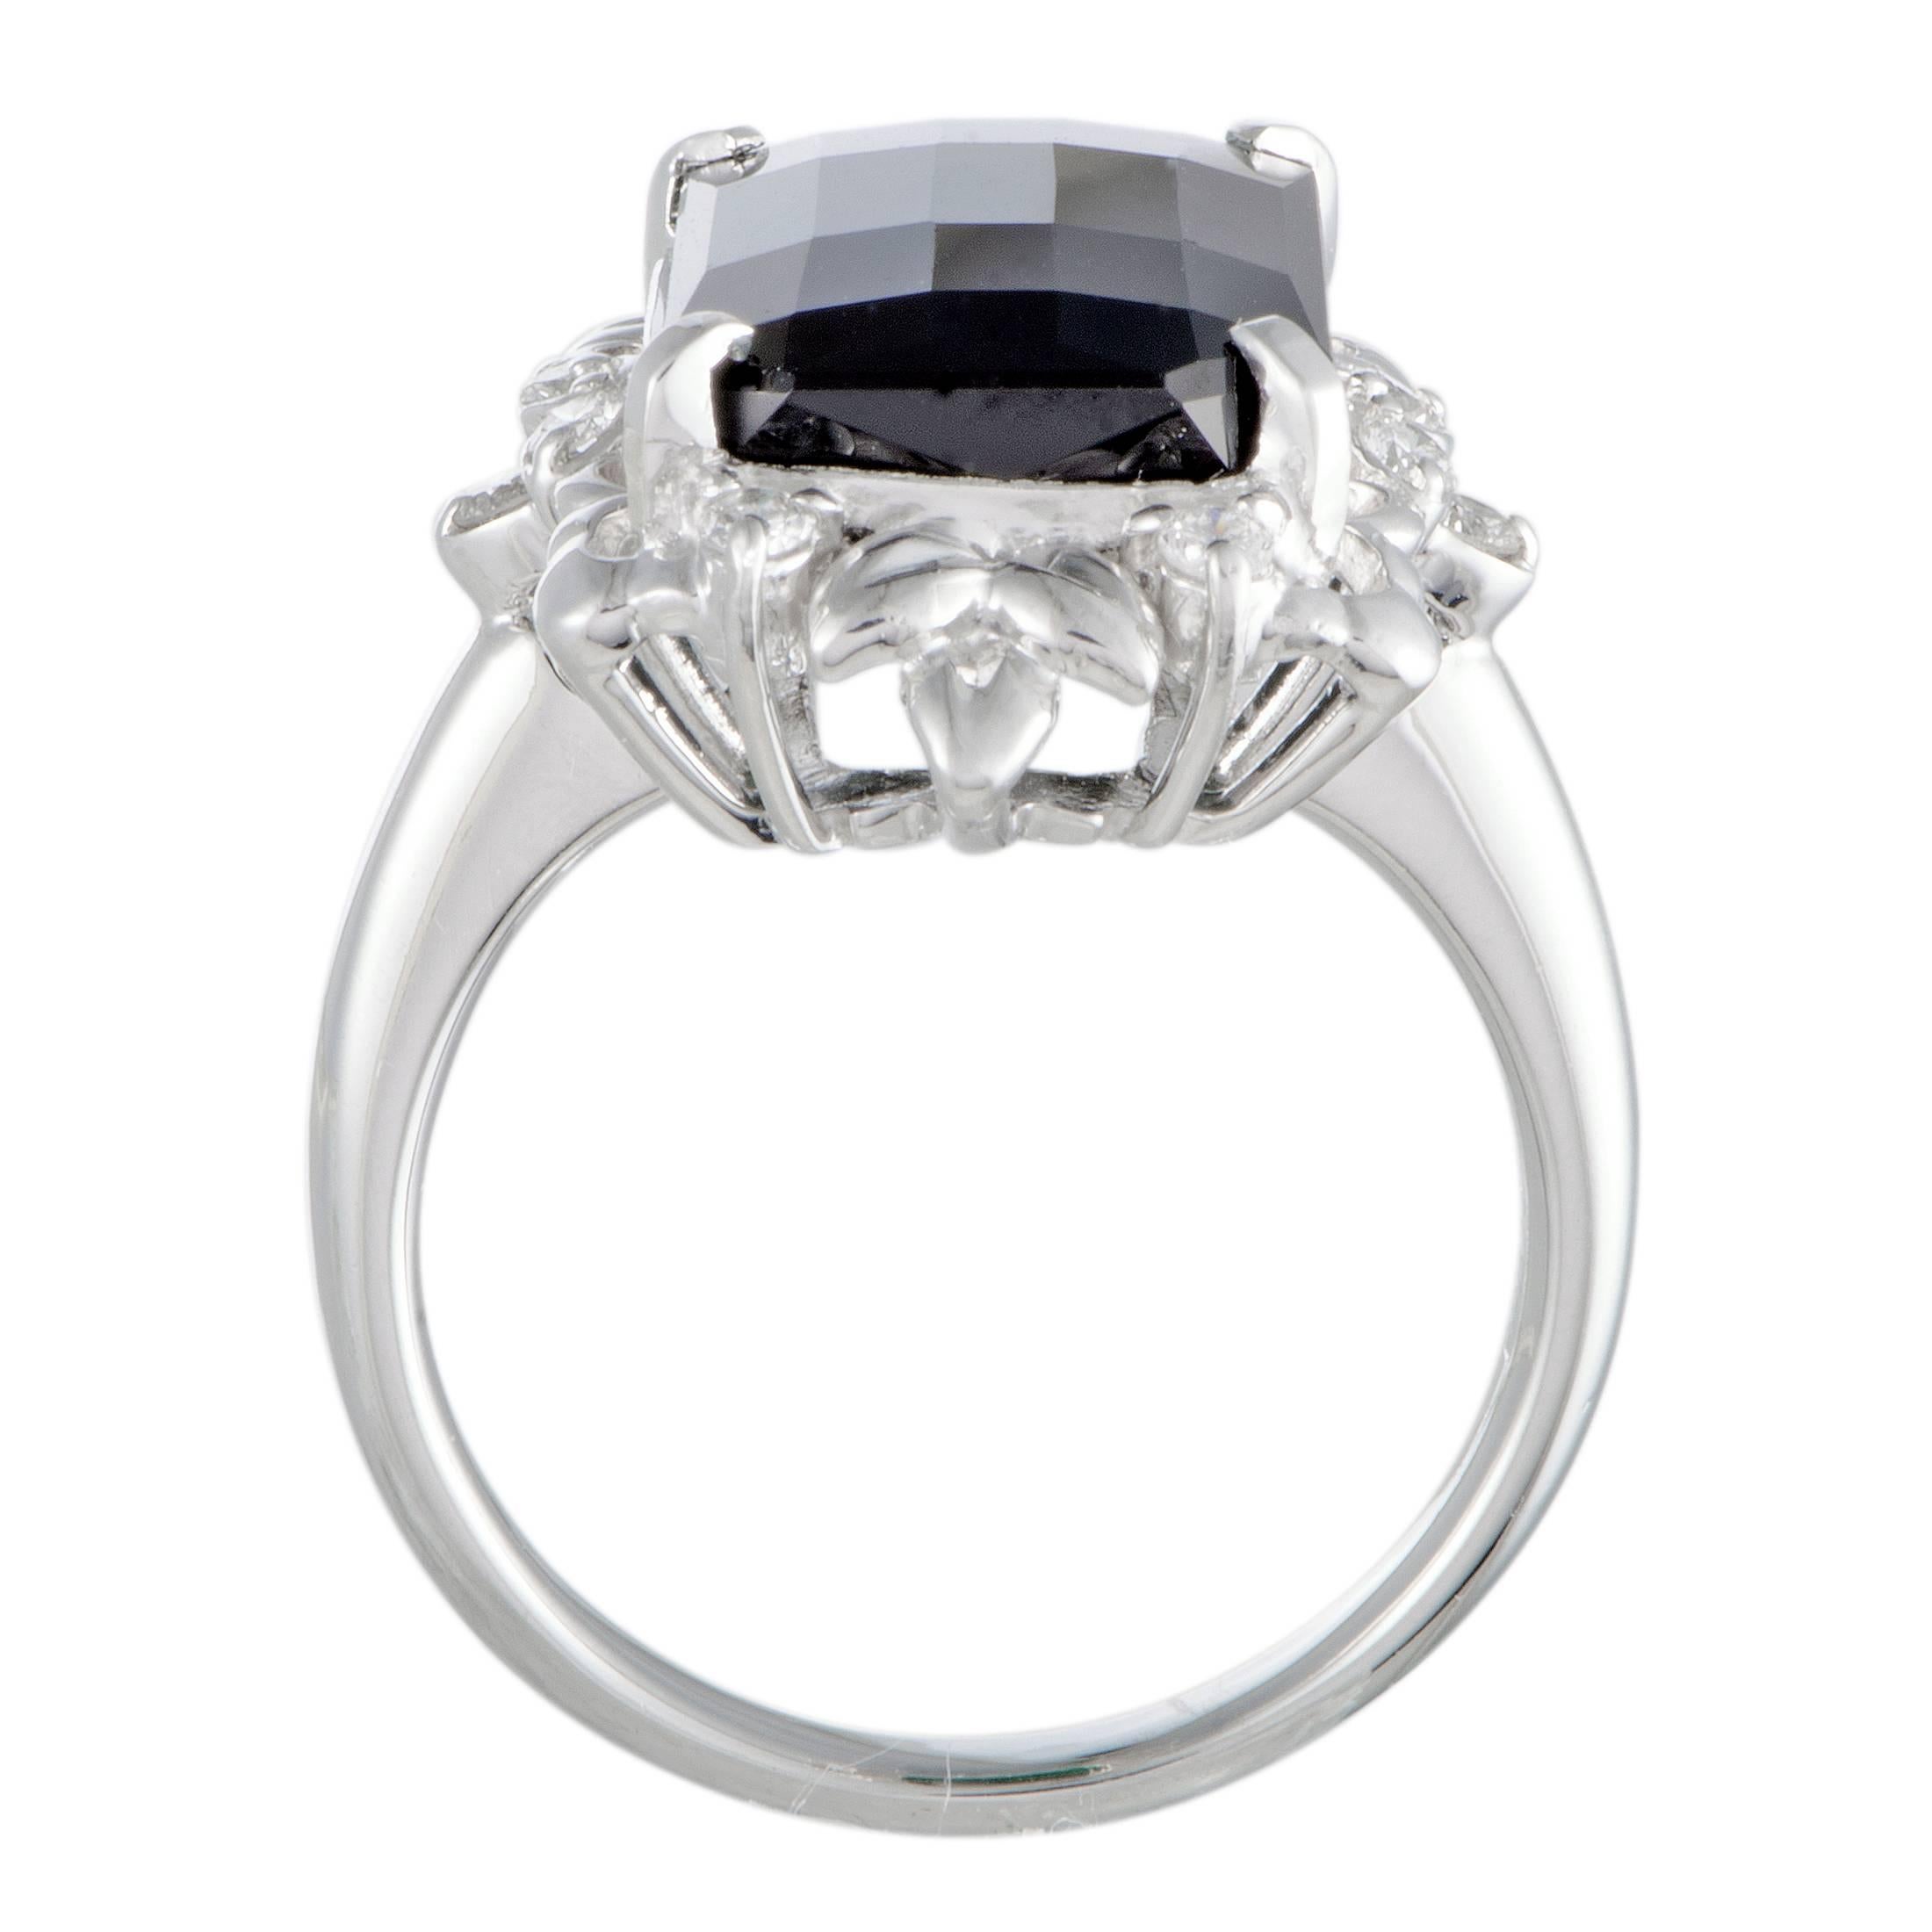 Boasting an irresistibly intricate design and set with an exquisitely cut gemstone, this stunning platinum ring offers a look of utmost refinement and prestige. The center stone is an astonishing green tourmaline that weighs 7.10 carats and is